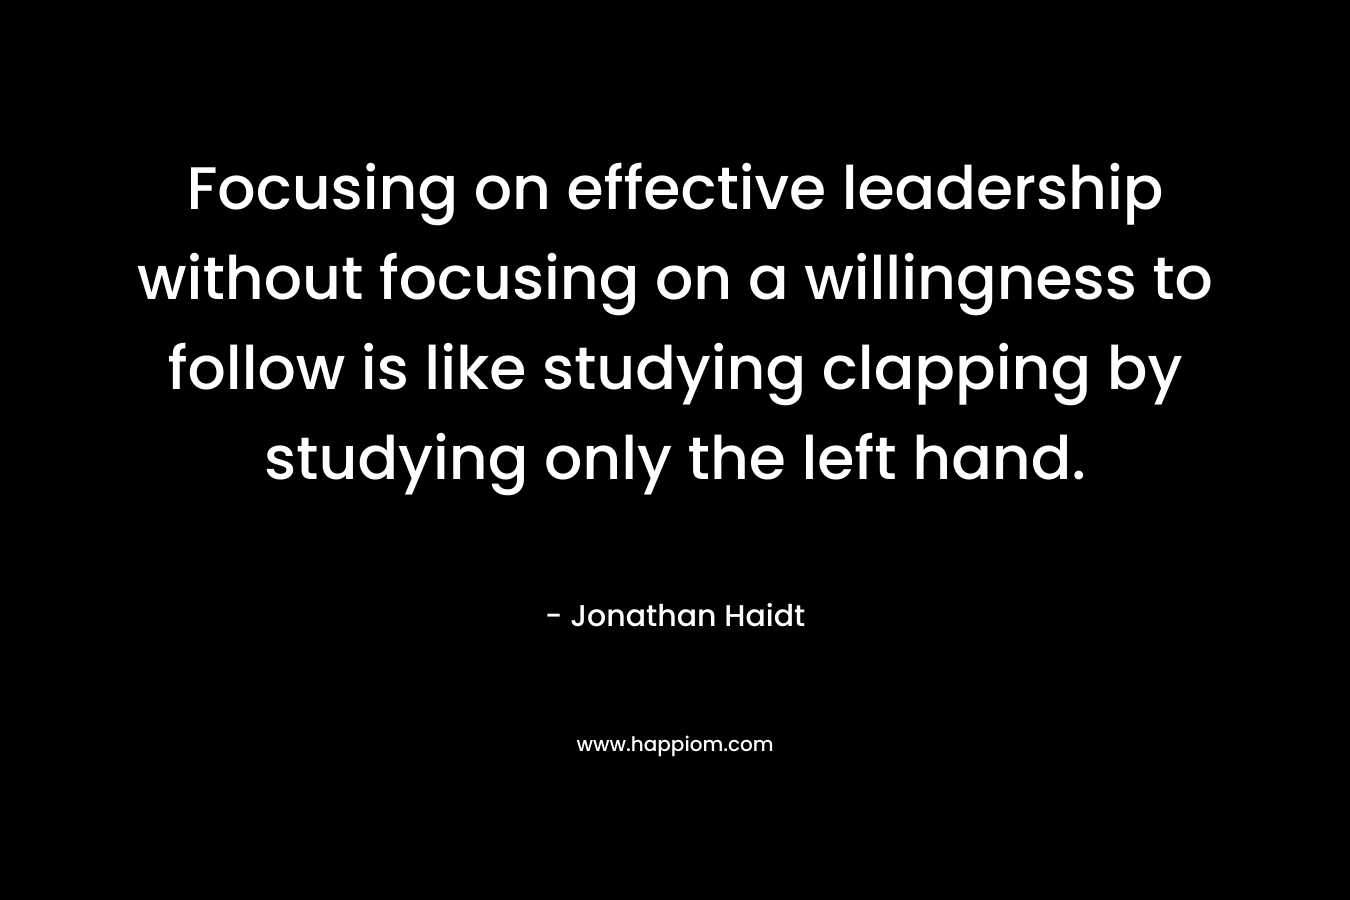 Focusing on effective leadership without focusing on a willingness to follow is like studying clapping by studying only the left hand. – Jonathan Haidt